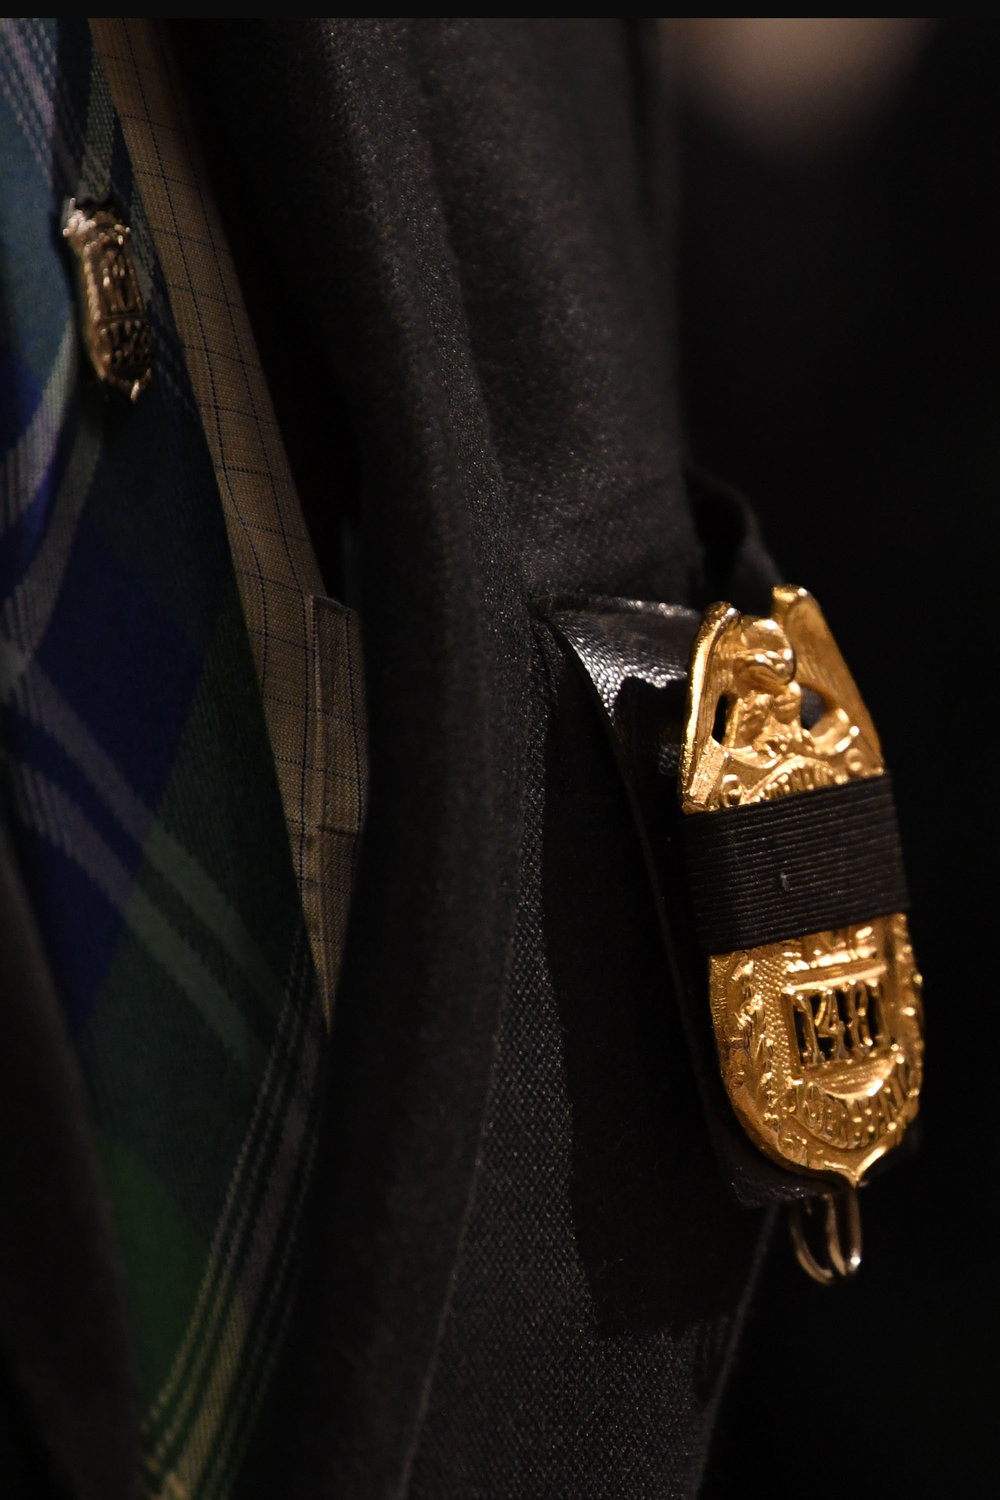 A badge cloaked in black is worn by a congregant.